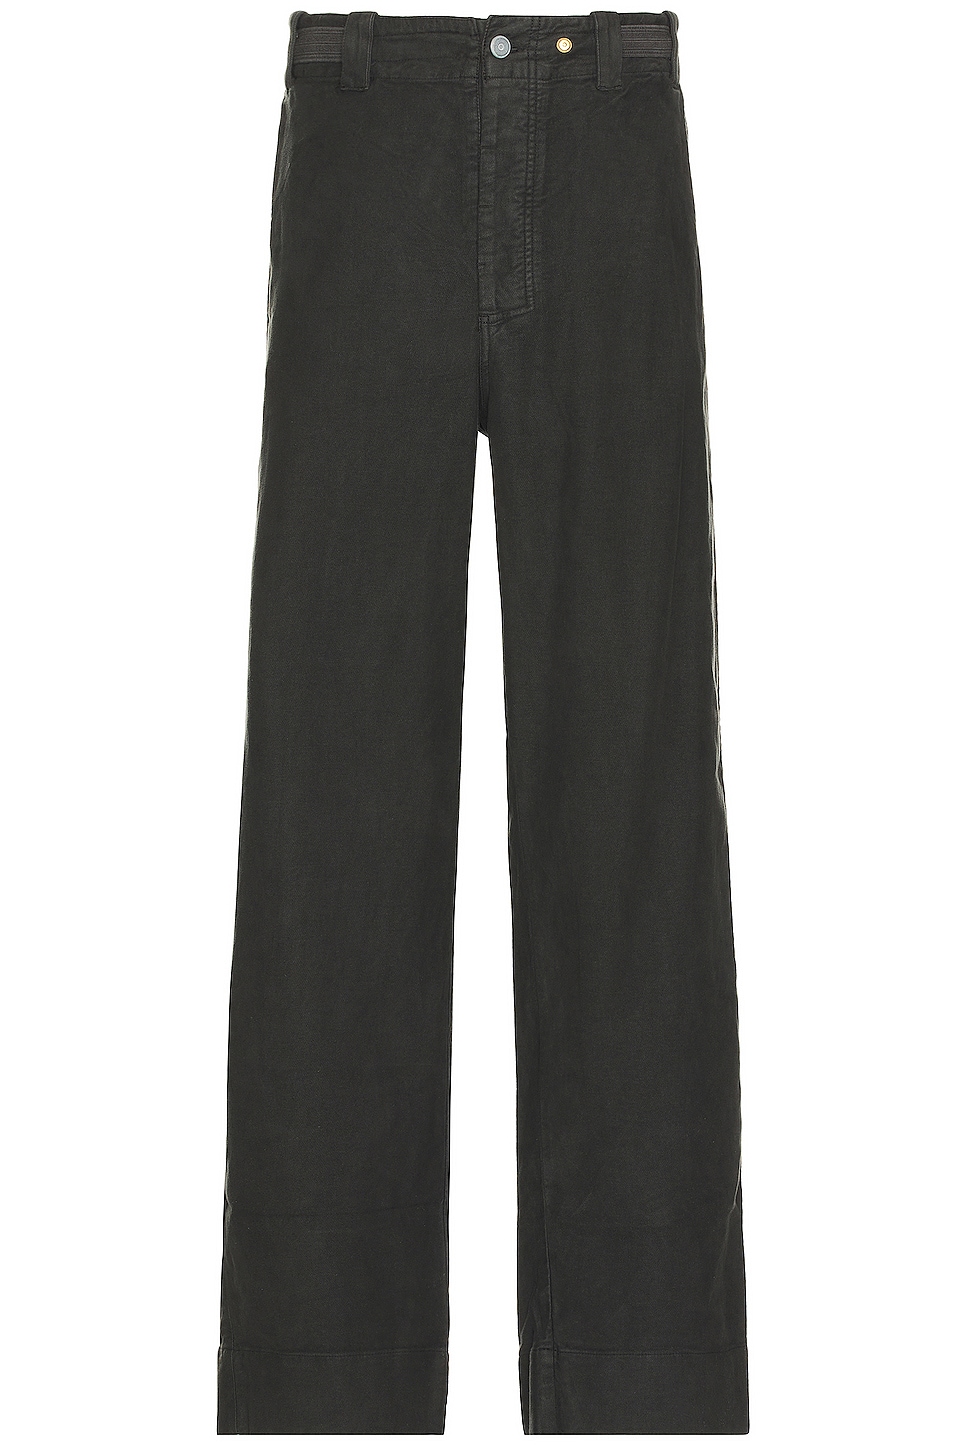 Image 1 of Objects IV Life Drawstring Pants in Anthracite Grey